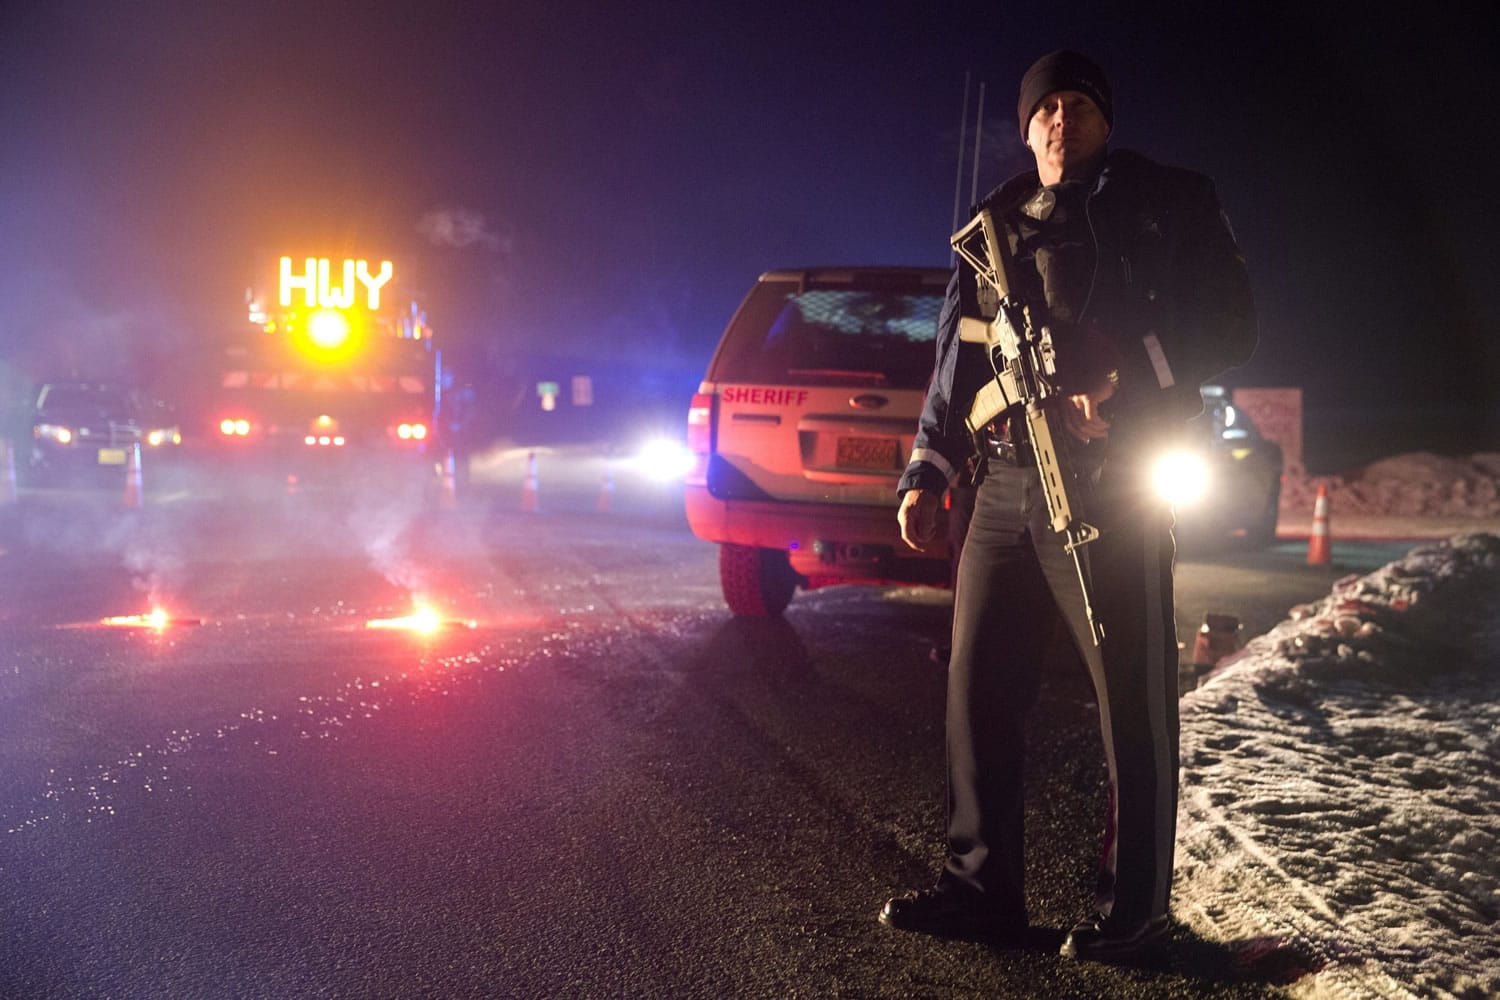 Sgt. Tom Hutchison stands in front of an Oregon State Police roadblock on Highway 395 between John Day and Burns by Oregon State police officers Tuesday, Jan. 26, 2016. Authorities say shots were fired Tuesday during the arrest of members of an armed group that has occupied a national wildlife refuge in Oregon for more than three weeks. The FBI said authorities arrested Ammon Bundy, 40, his brother Ryan Bundy, 43, Brian Cavalier, 44, Shawna Cox, 59, and Ryan Payne, 32, during a traffic stop on U.S. Highway 395 Tuesday afternoon. Authorities said another person, Joseph Donald O'Shaughnessy, 45, was arrested in Burns.